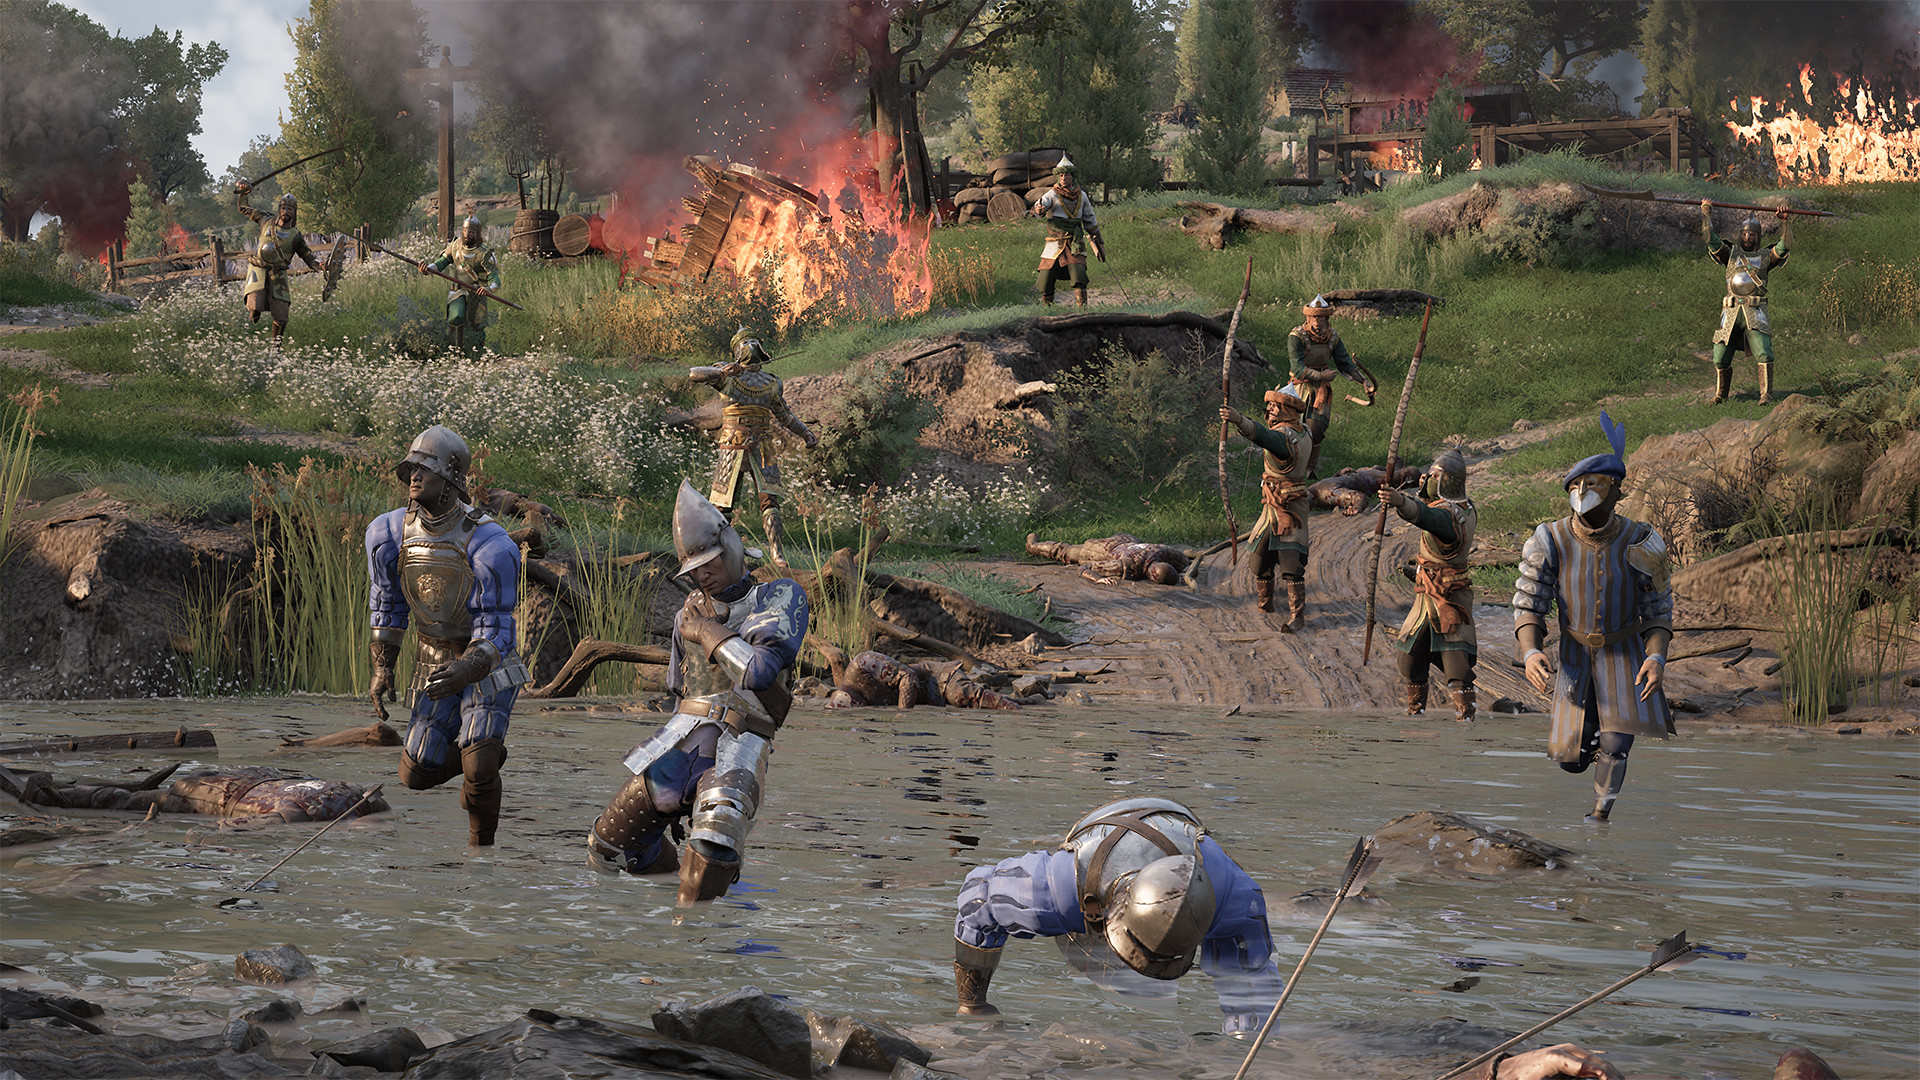 Gate crash a festival in the Chivalry 2: Raiding Party update